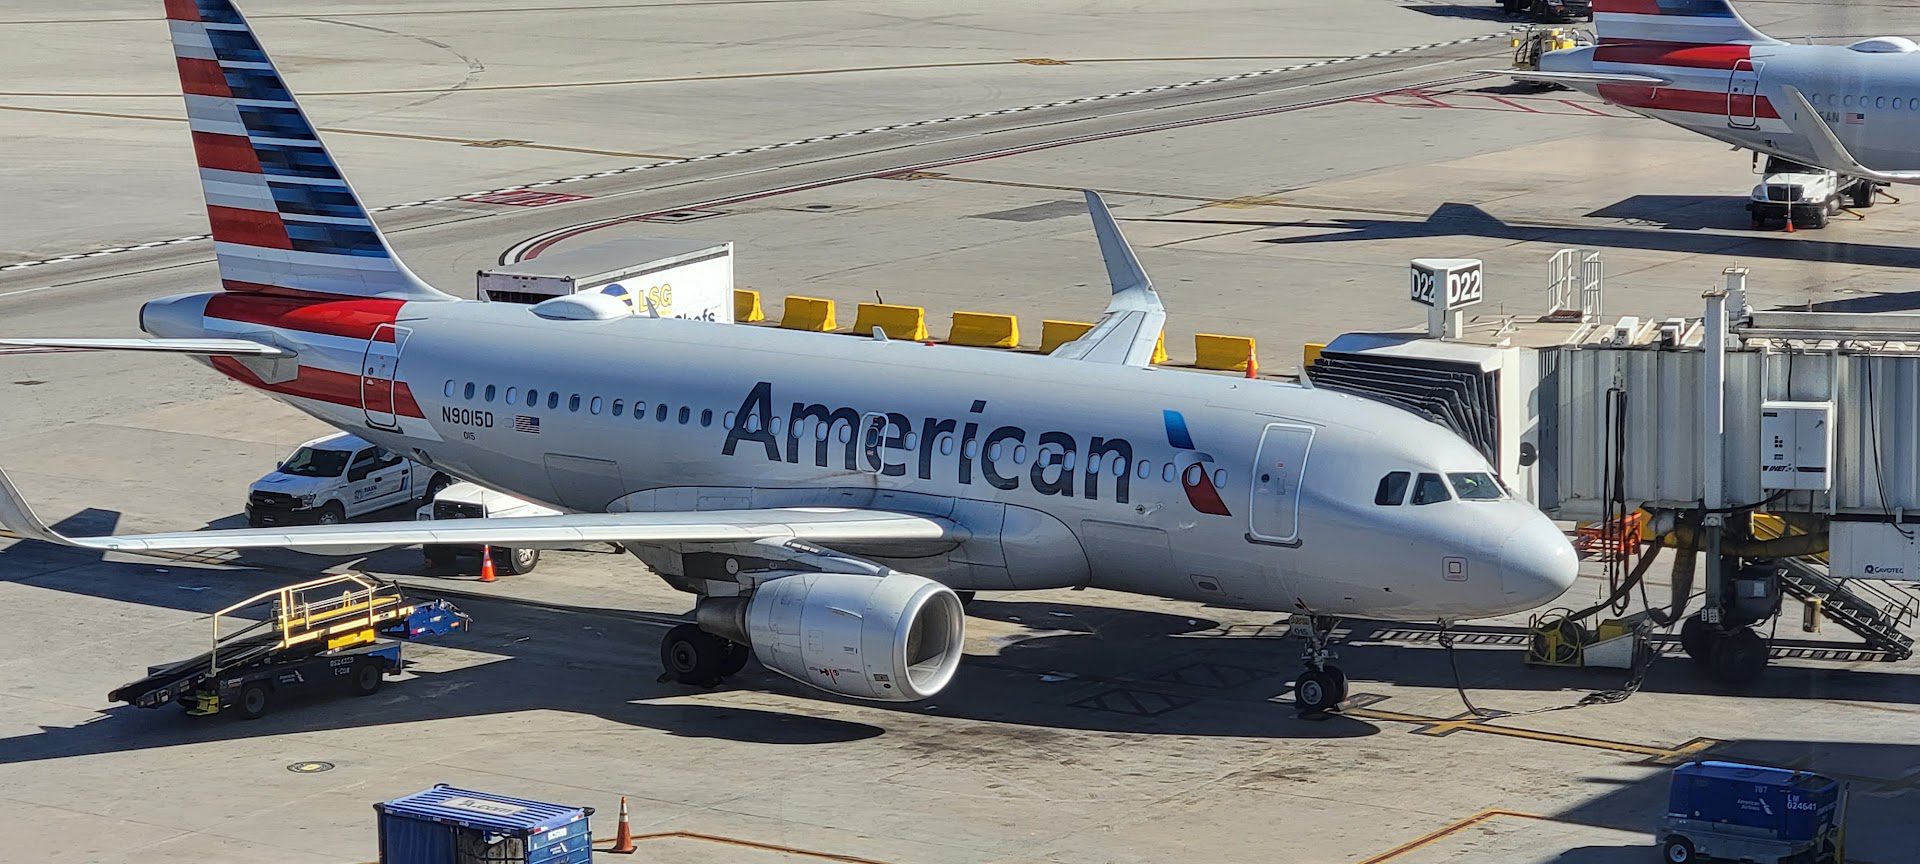 American Airlines Flight Sat On Tarmac For Hours Last Night With 